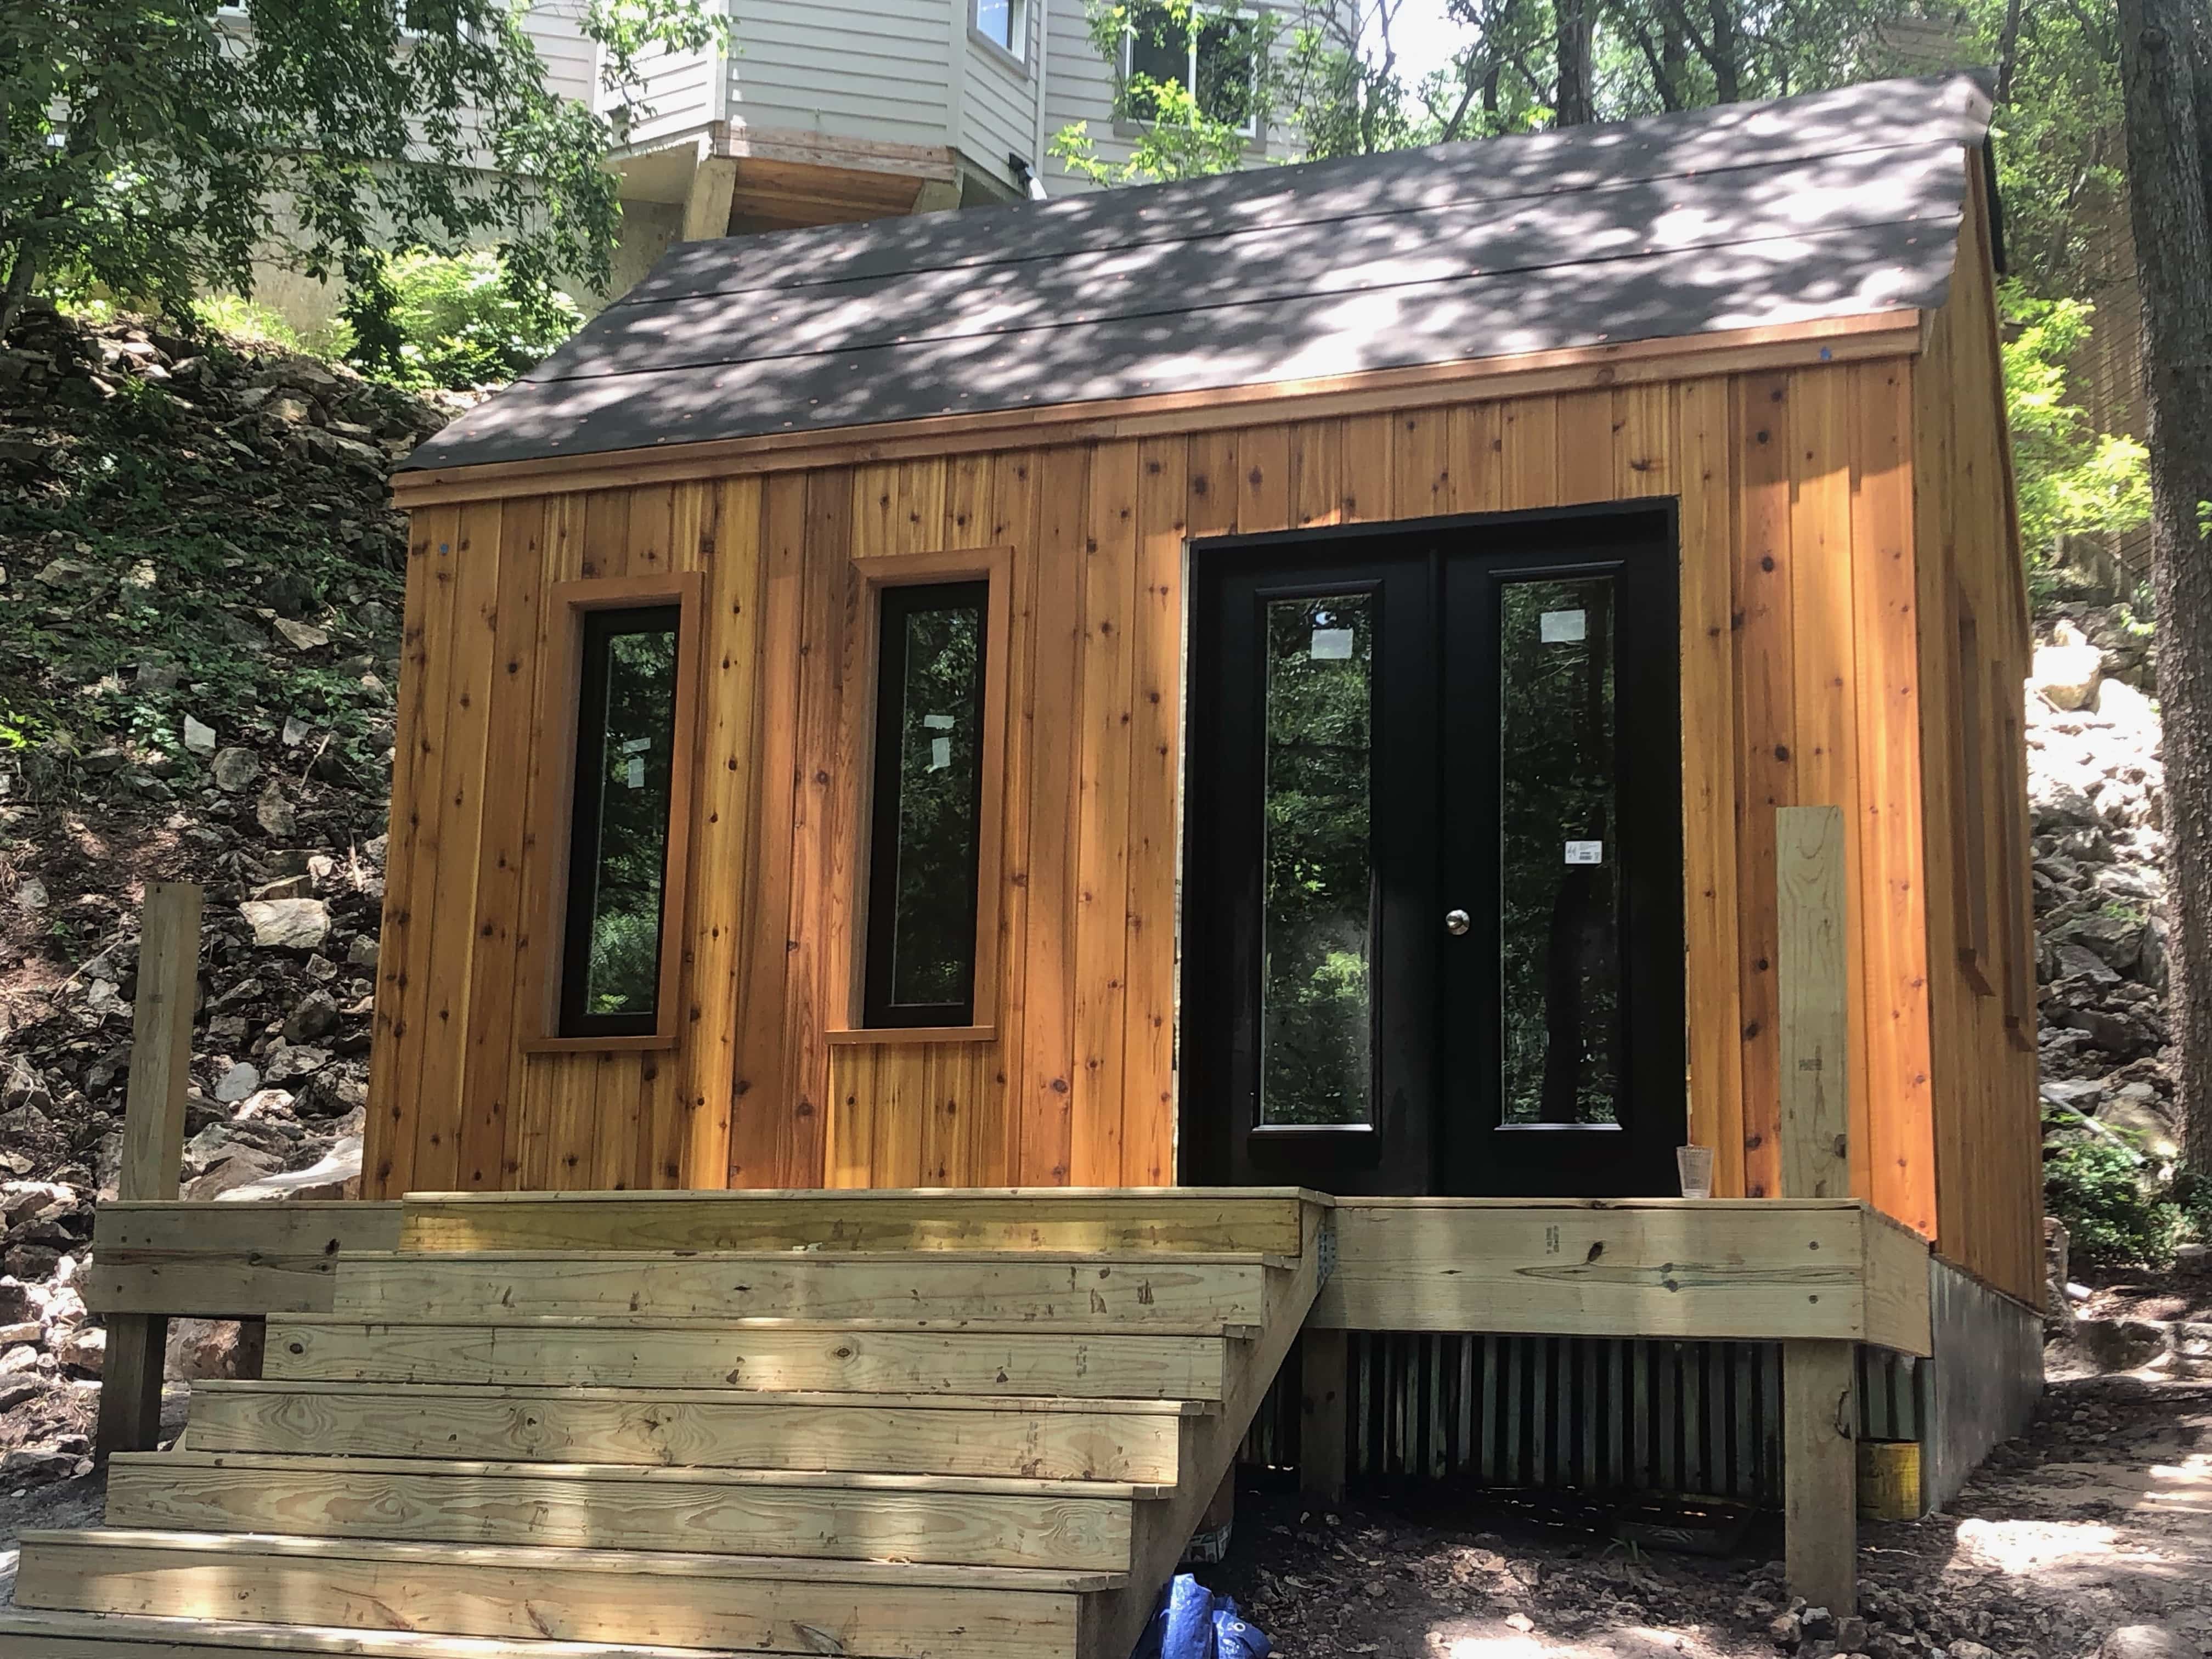 Front view of 12’ x 14' Mini Oban Cabin located in Austin, Texas – Summerwood Products